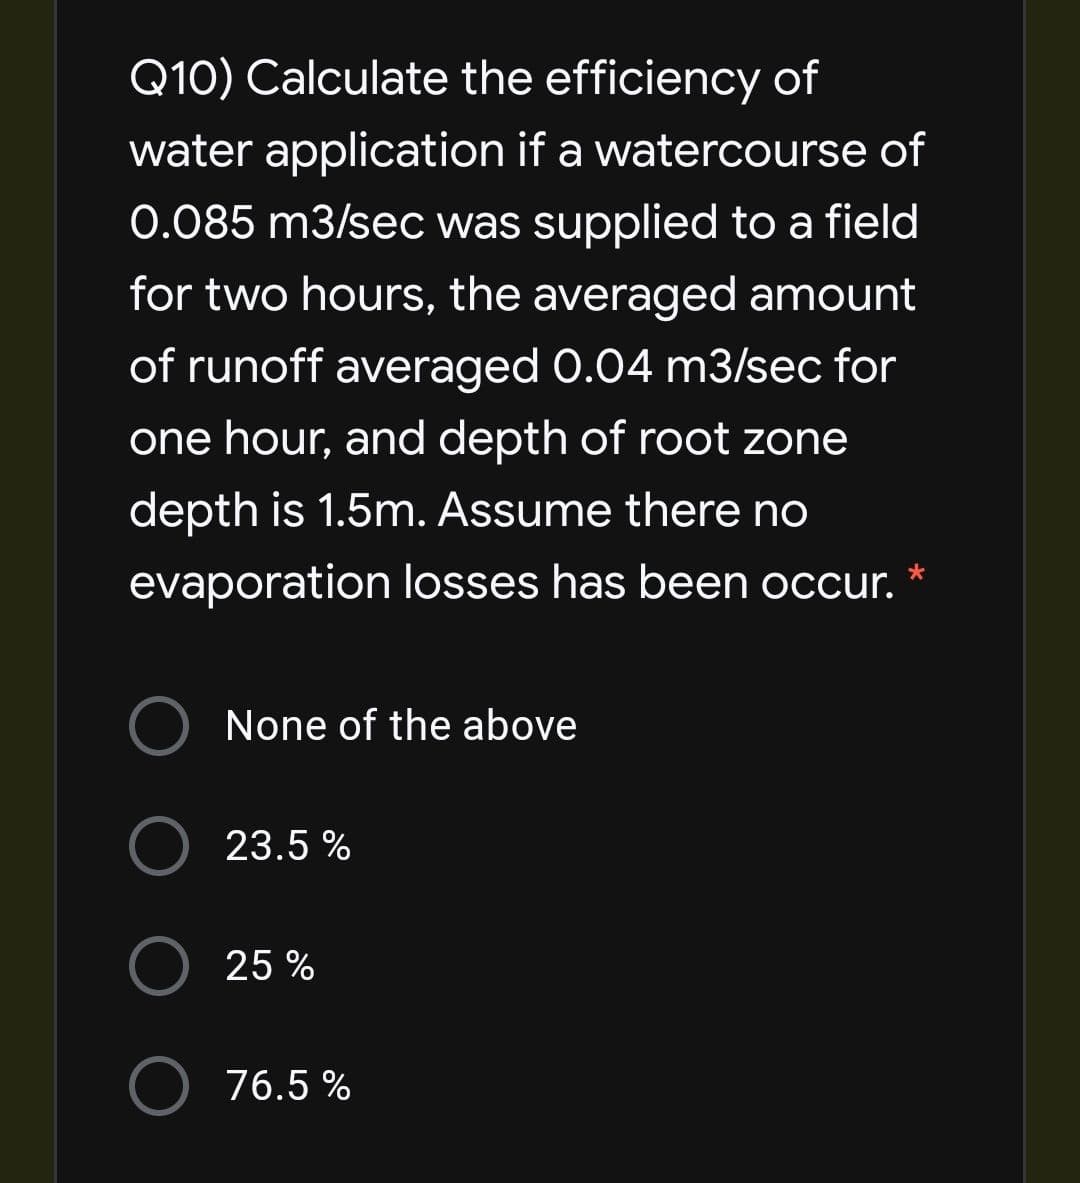 Q10) Calculate the efficiency of
water application if a watercourse of
0.085 m3/sec was supplied to a field
for two hours, the averaged amount
of runoff averaged 0.04 m3sec for
one hour, and depth of root zone
depth is 1.5m. Assume there no
evaporation losses has been occur.
None of the above
23.5 %
O 25 %
76.5 %
